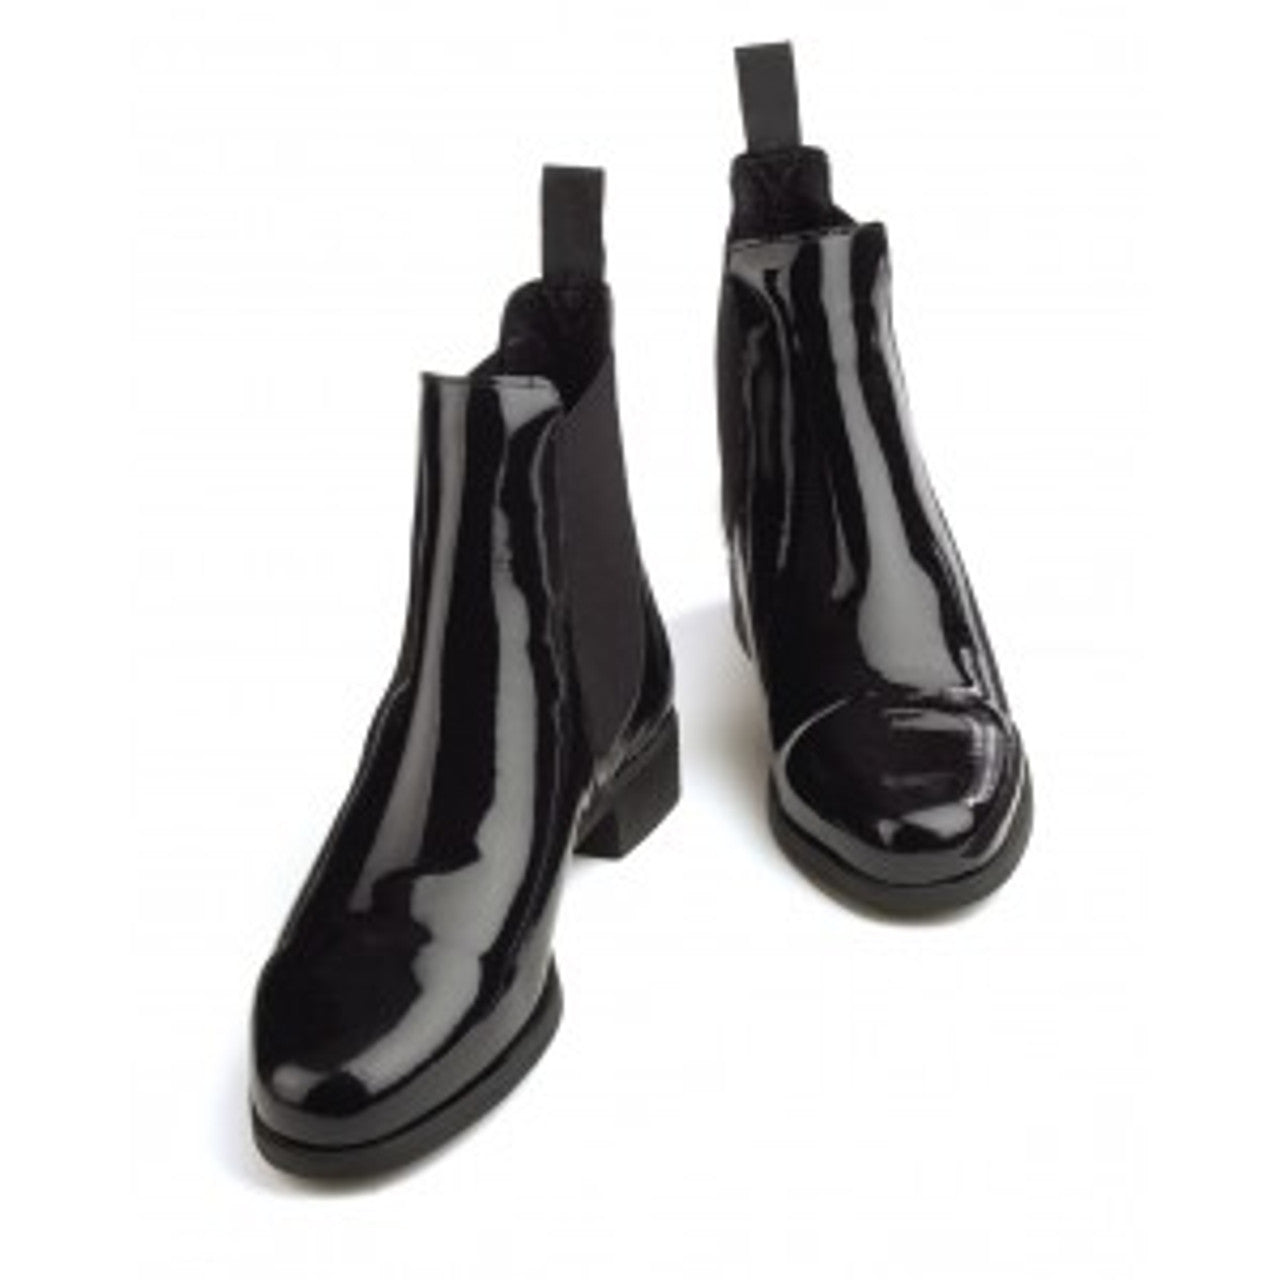 Children's Patent Leather Jod Boots by Ovation